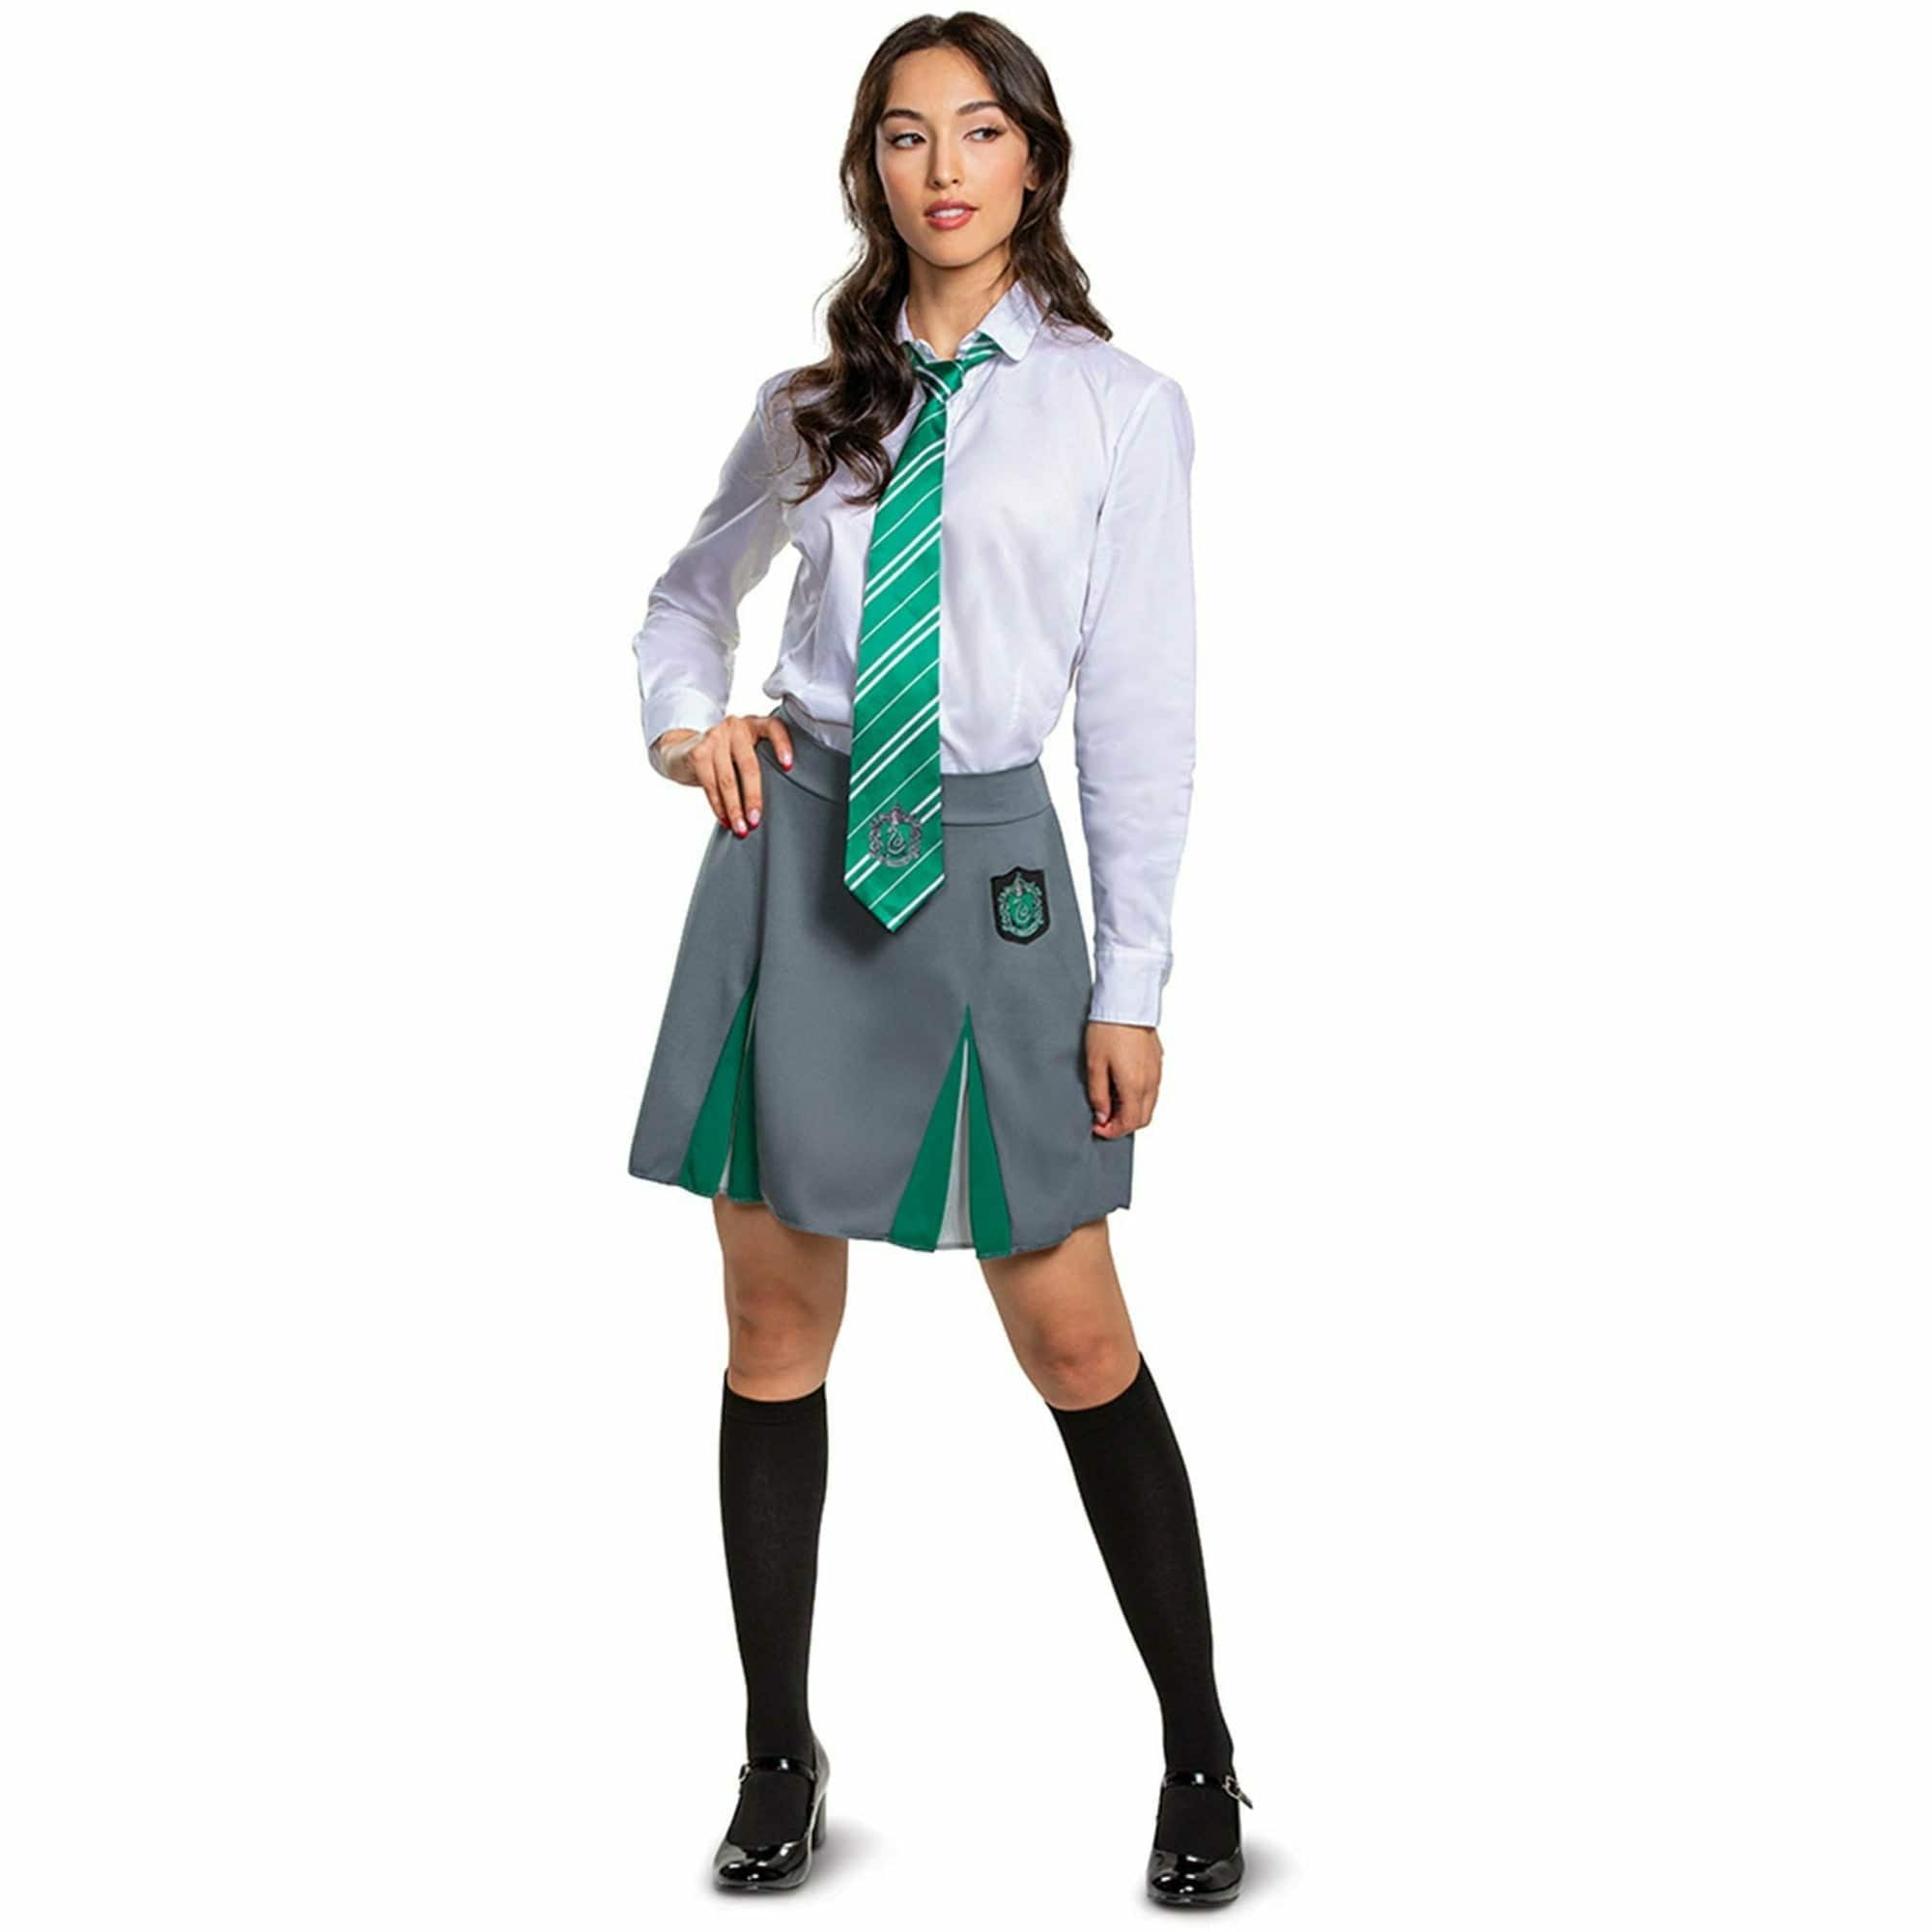 Disguise Adult Small 4-6 Slytherin Womens Adult Harry Potter Hogwarts